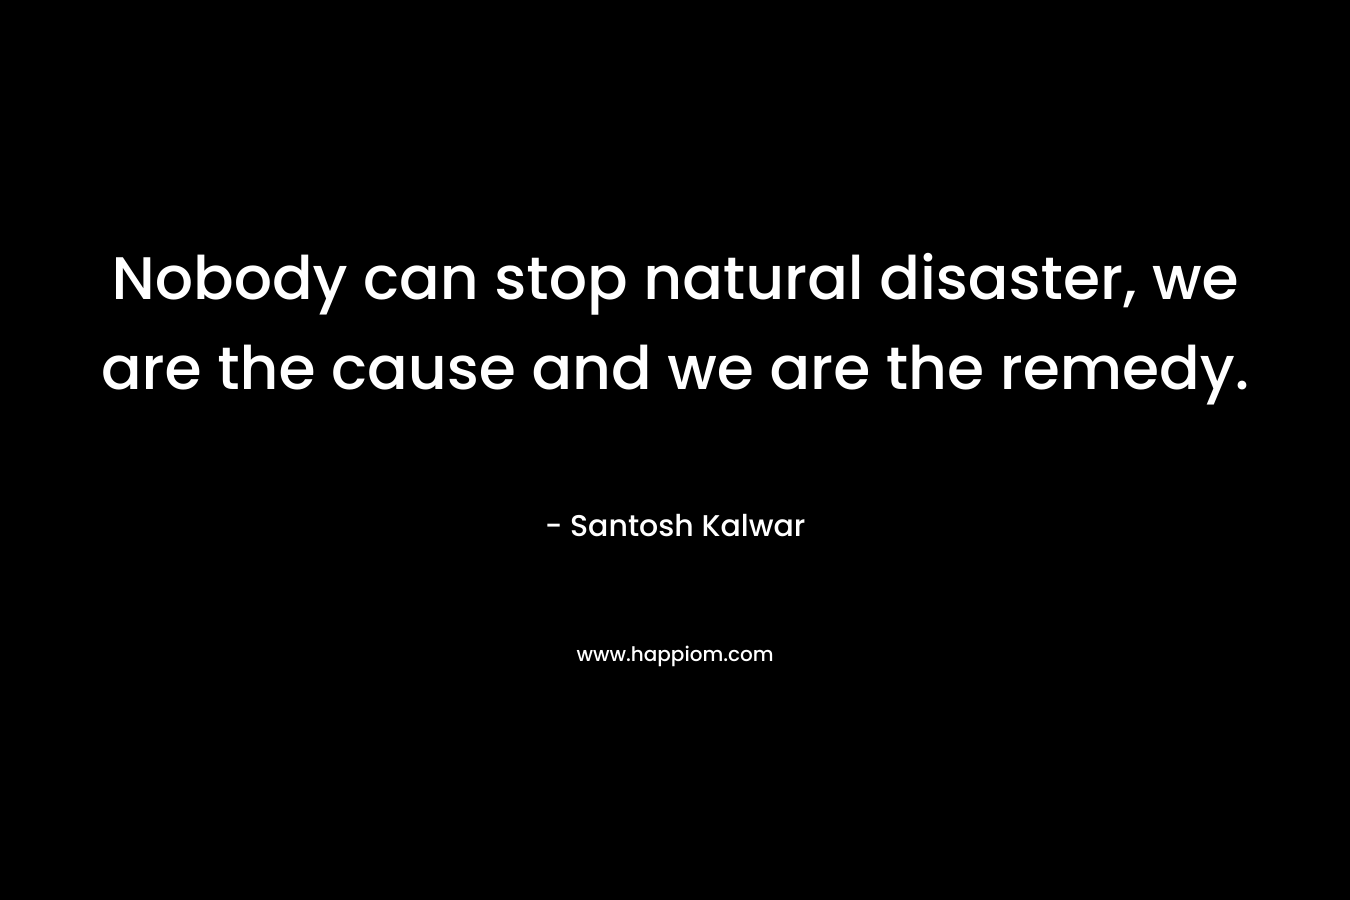 Nobody can stop natural disaster, we are the cause and we are the remedy.